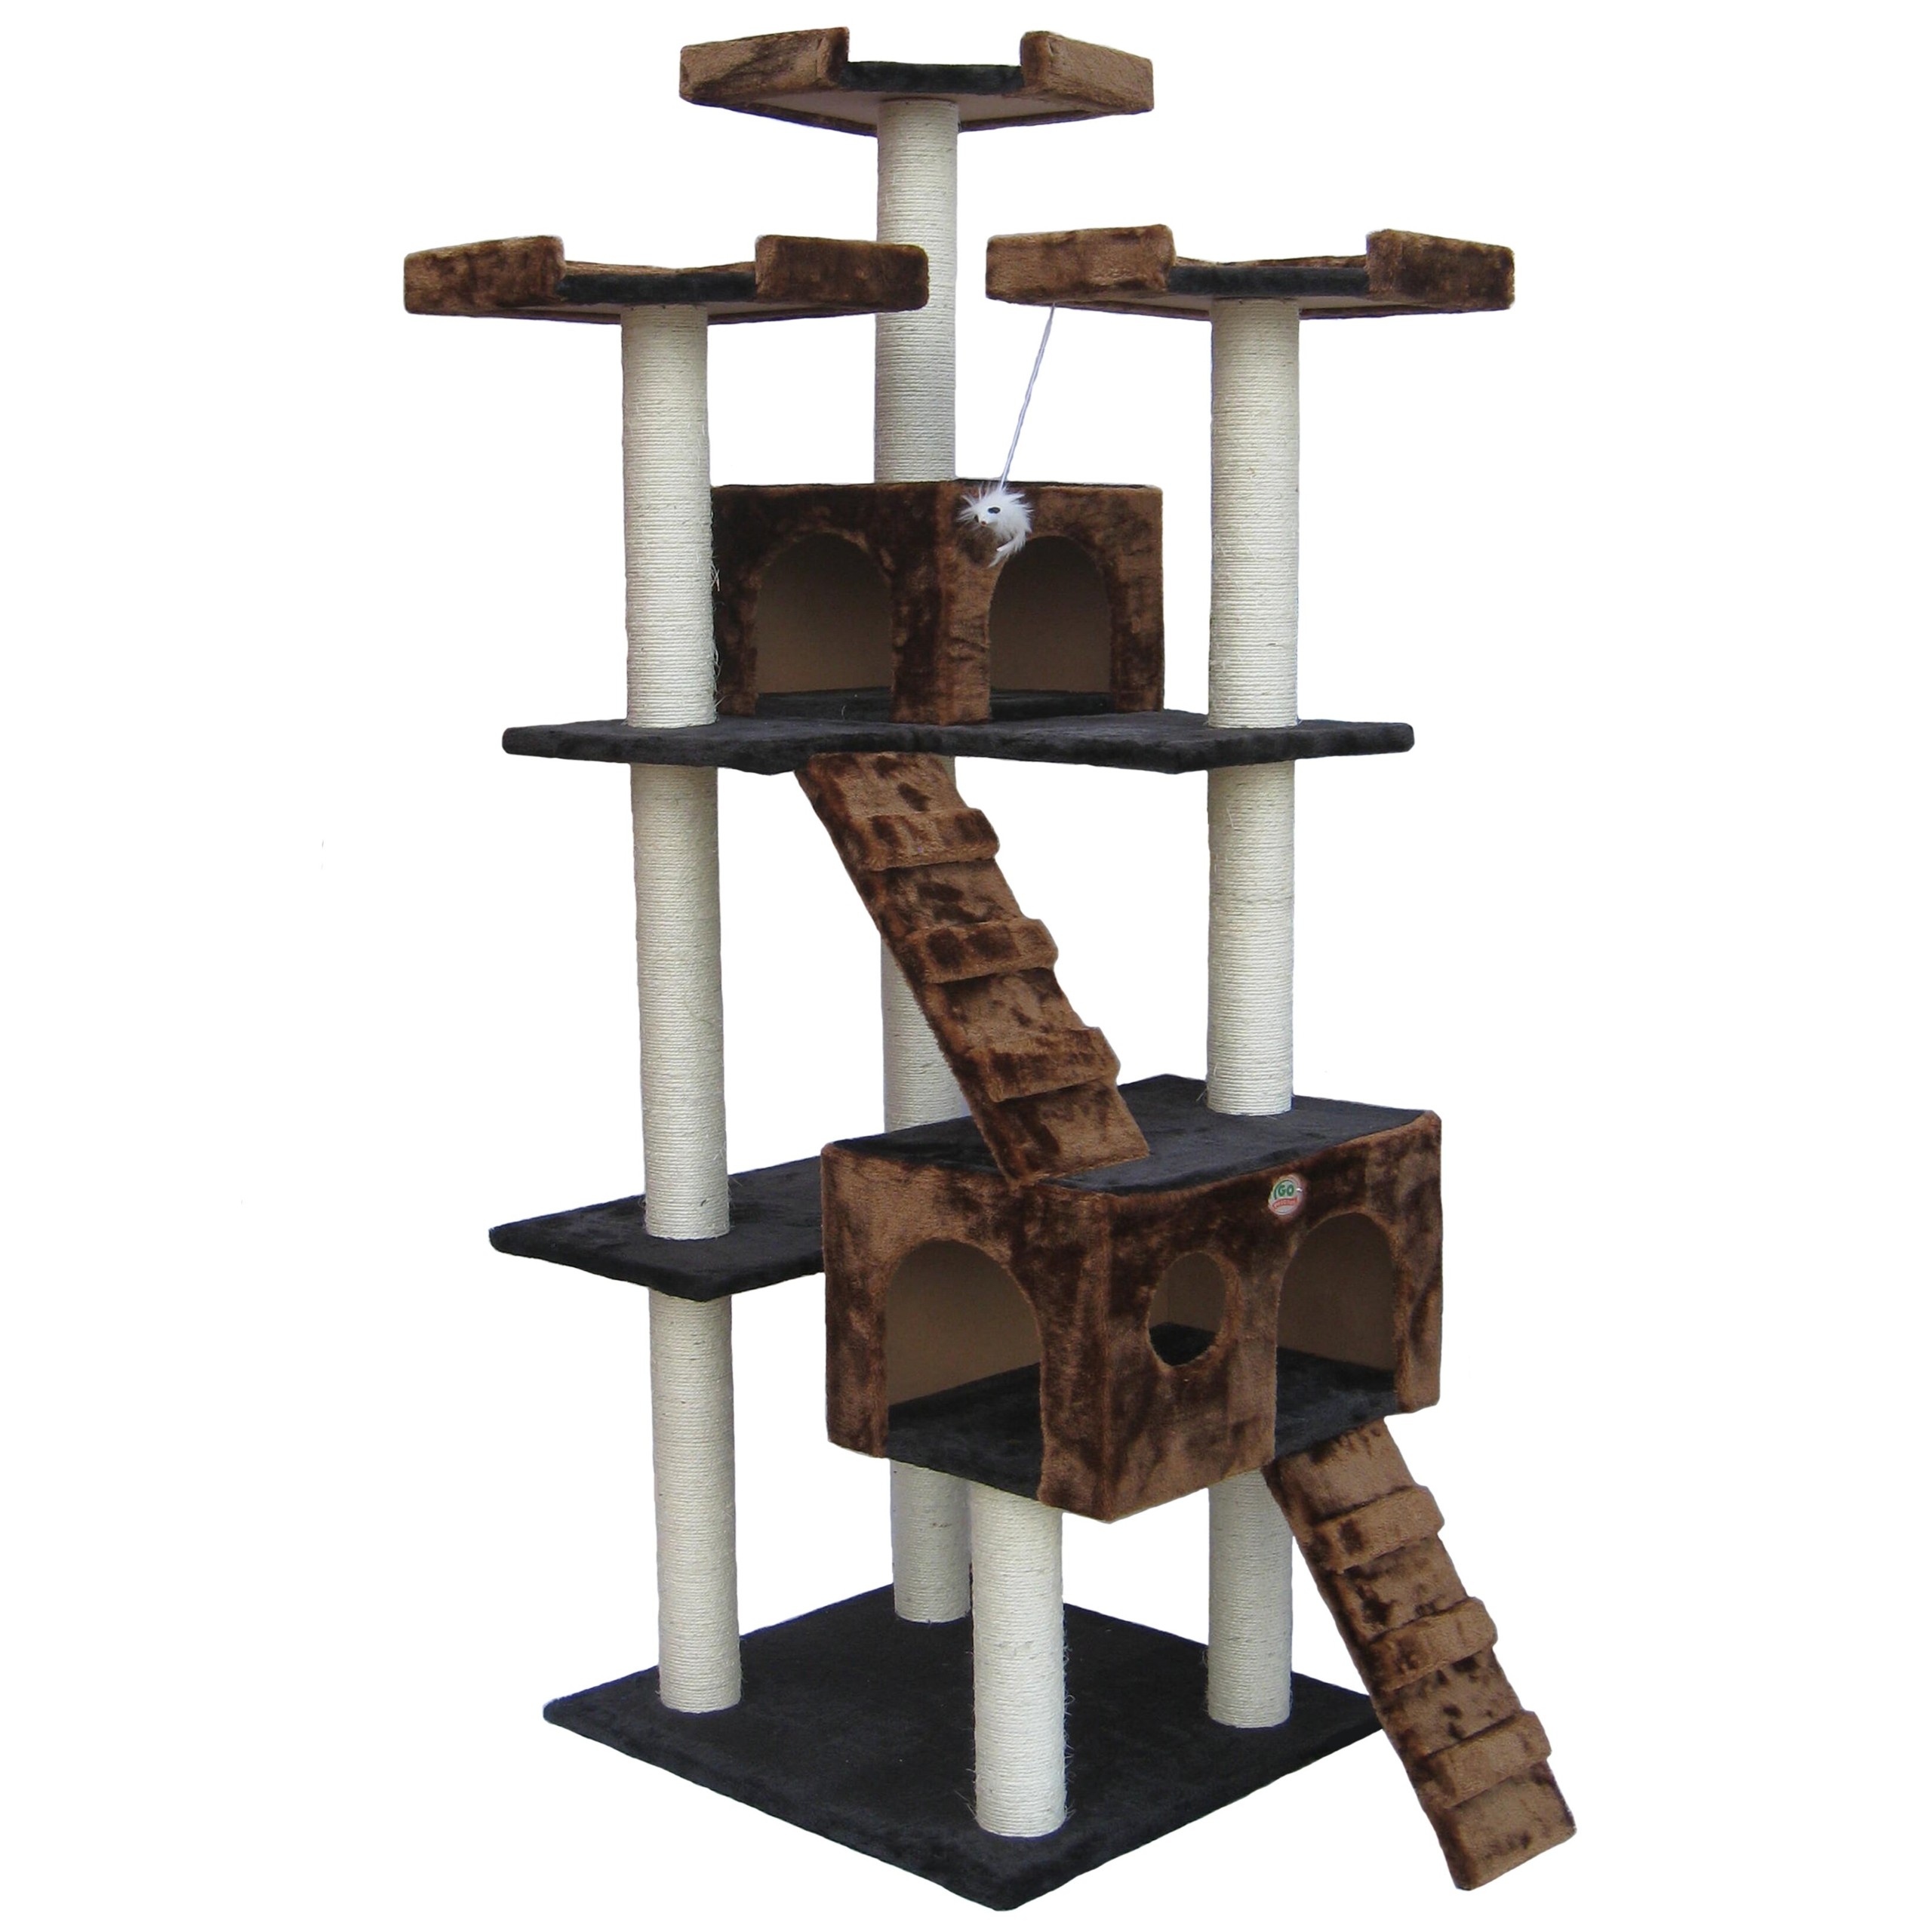 72 Inch Cat Tree Condo For Large Cats Or Kittens Faux Fur Tall Scratching Post